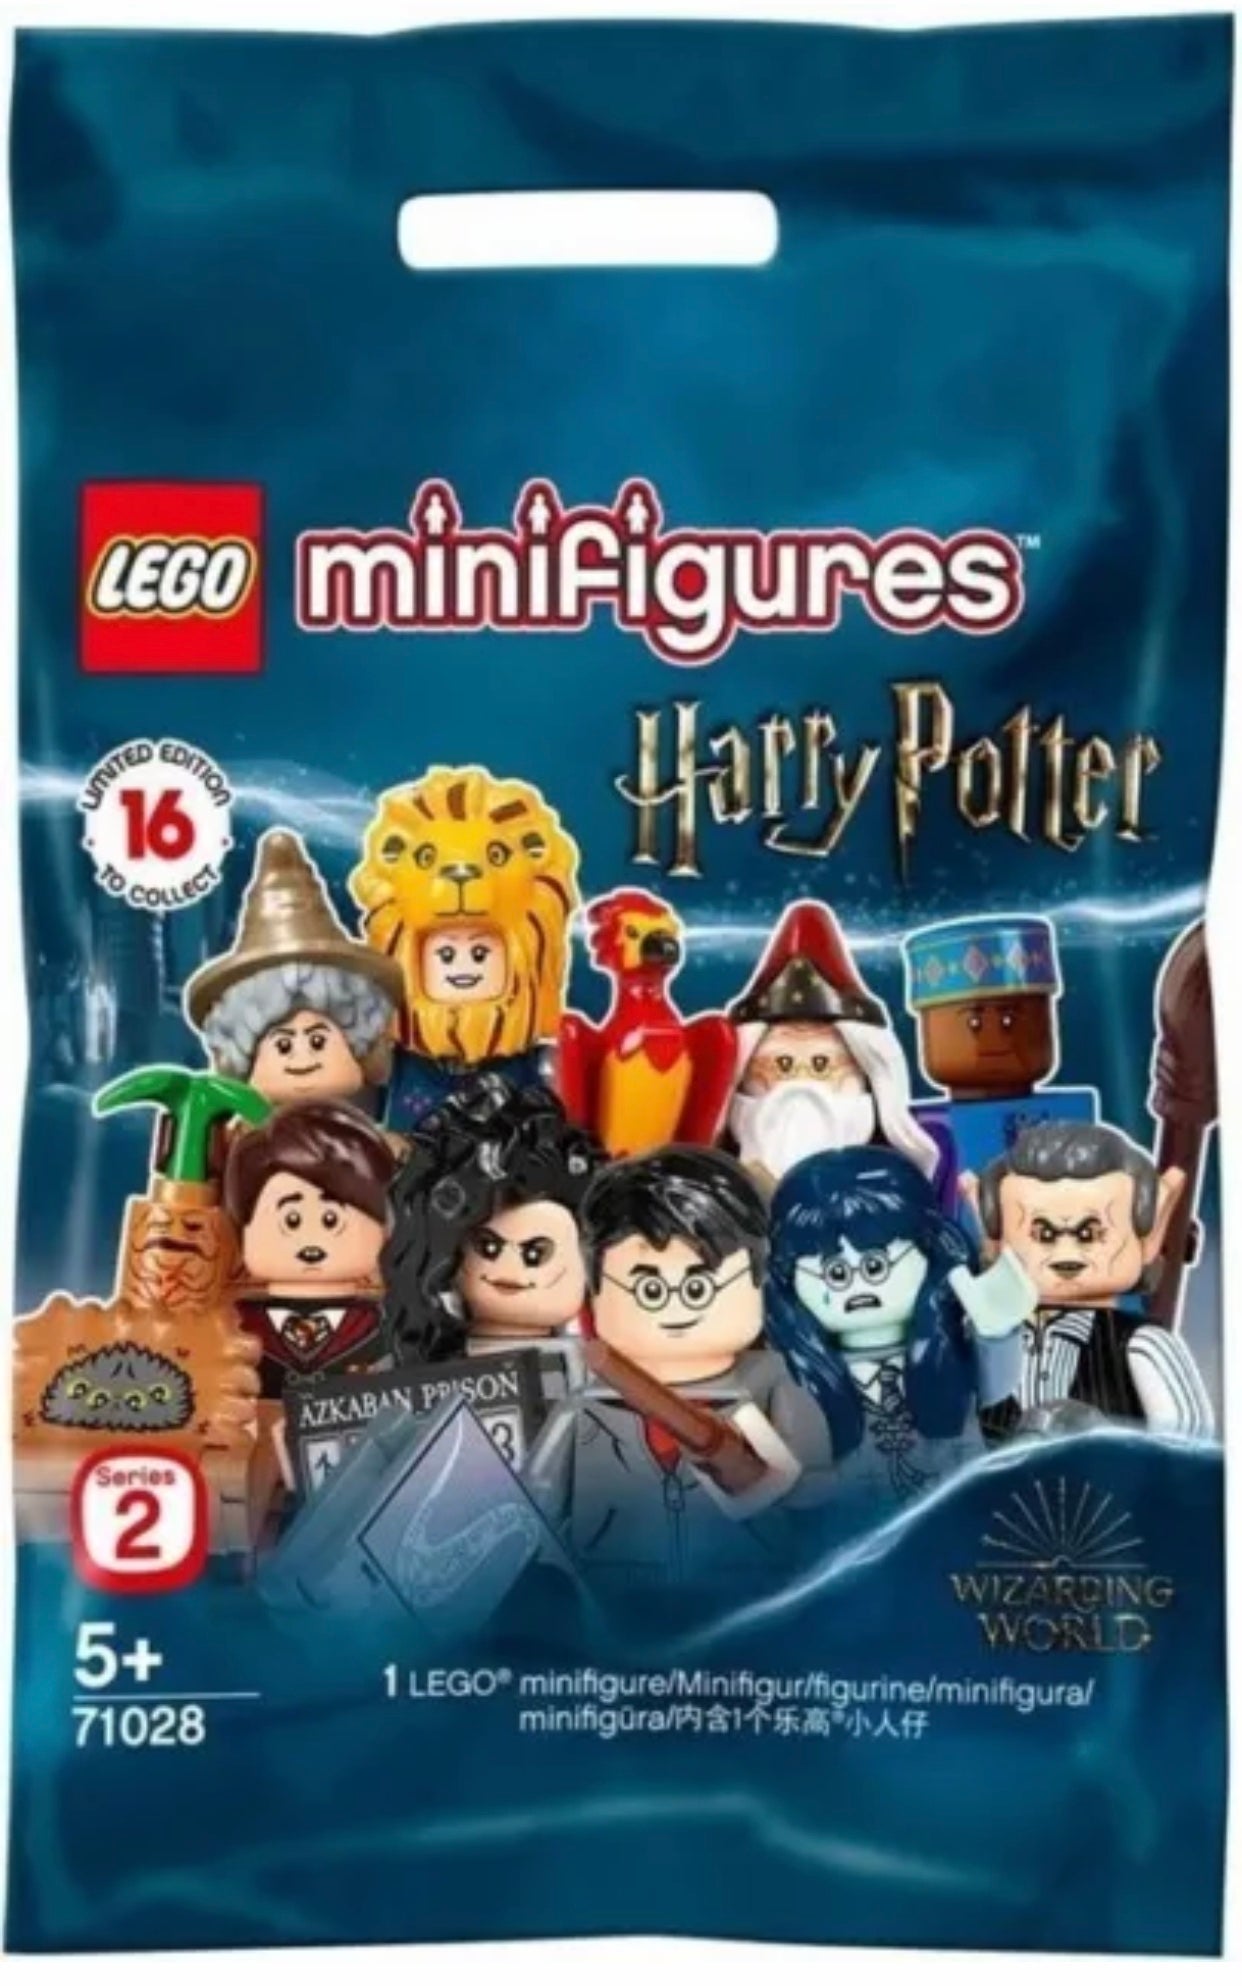 LEGO Harry Potter Series 2 Limited Edition Hermione Granger Minifigure 71028